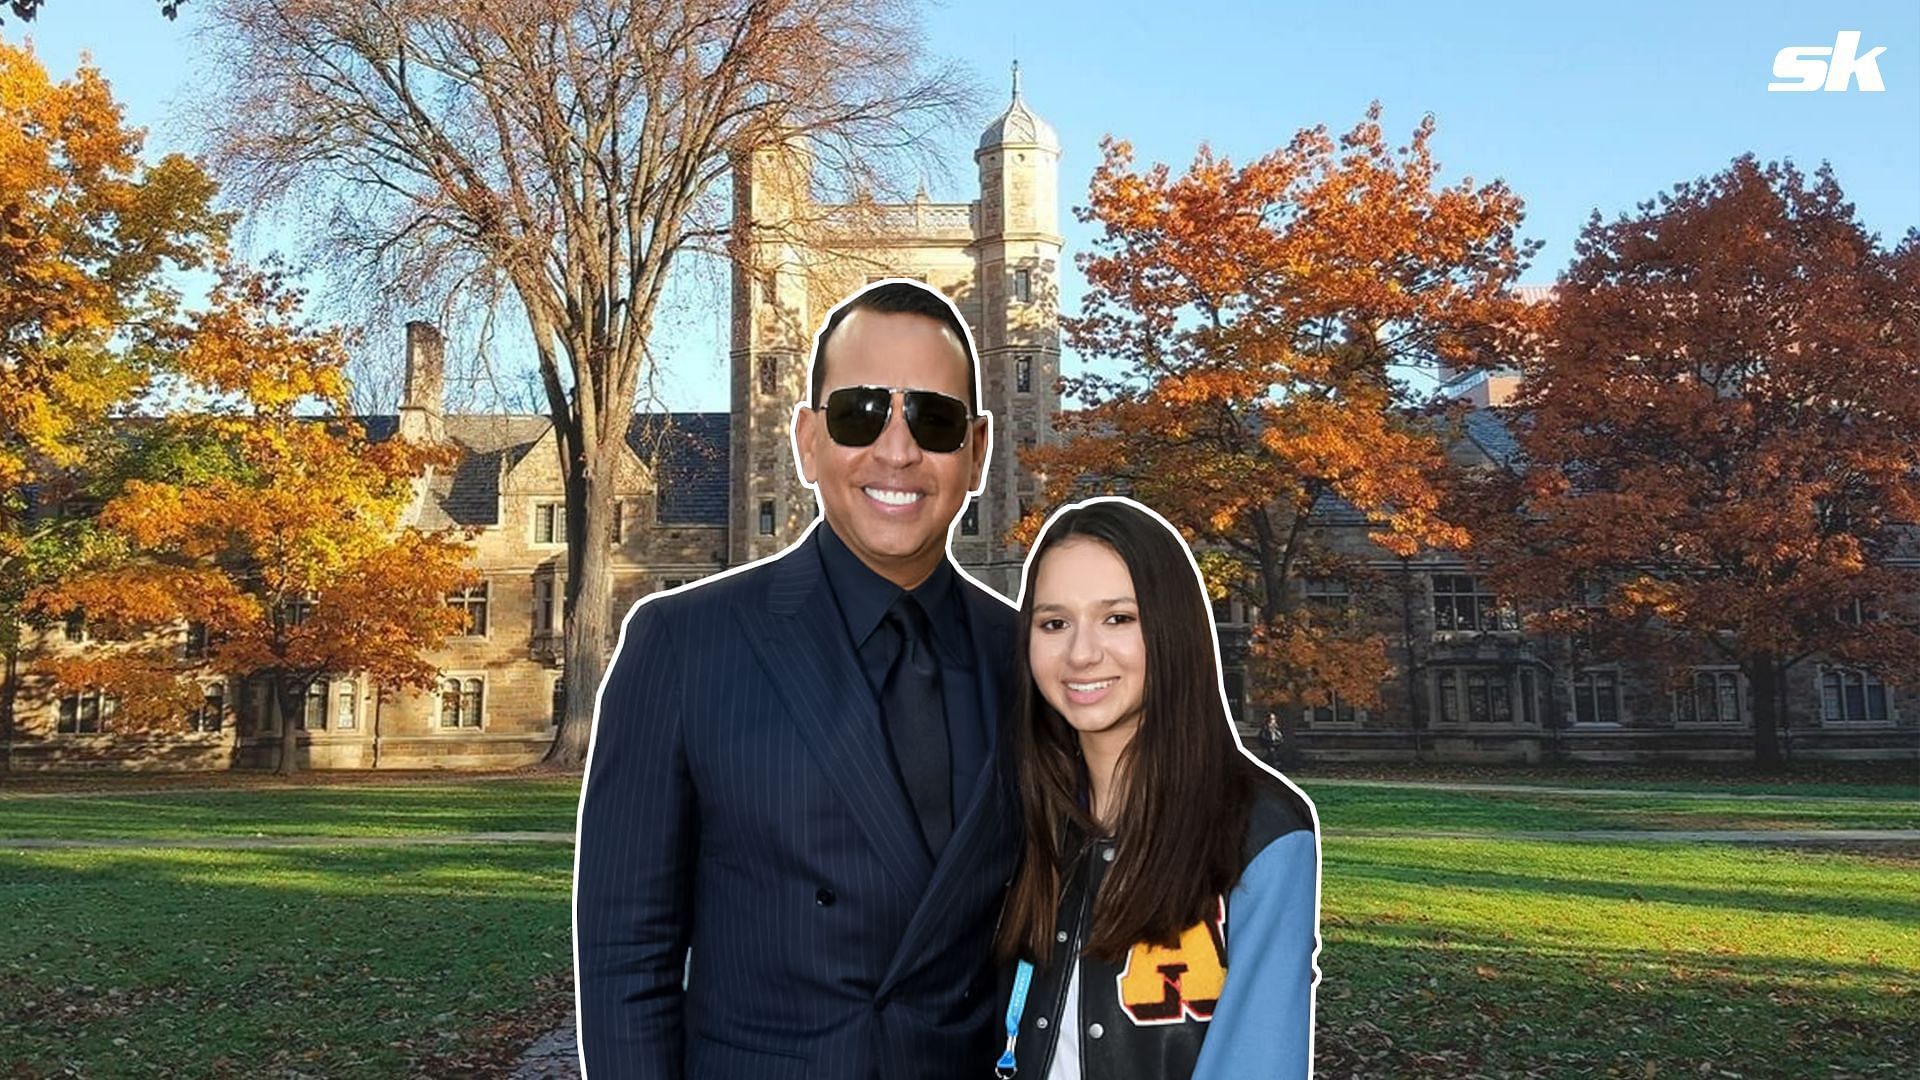 Alex Rodriguez was on the hunt for dinner with his daughter in Michigan